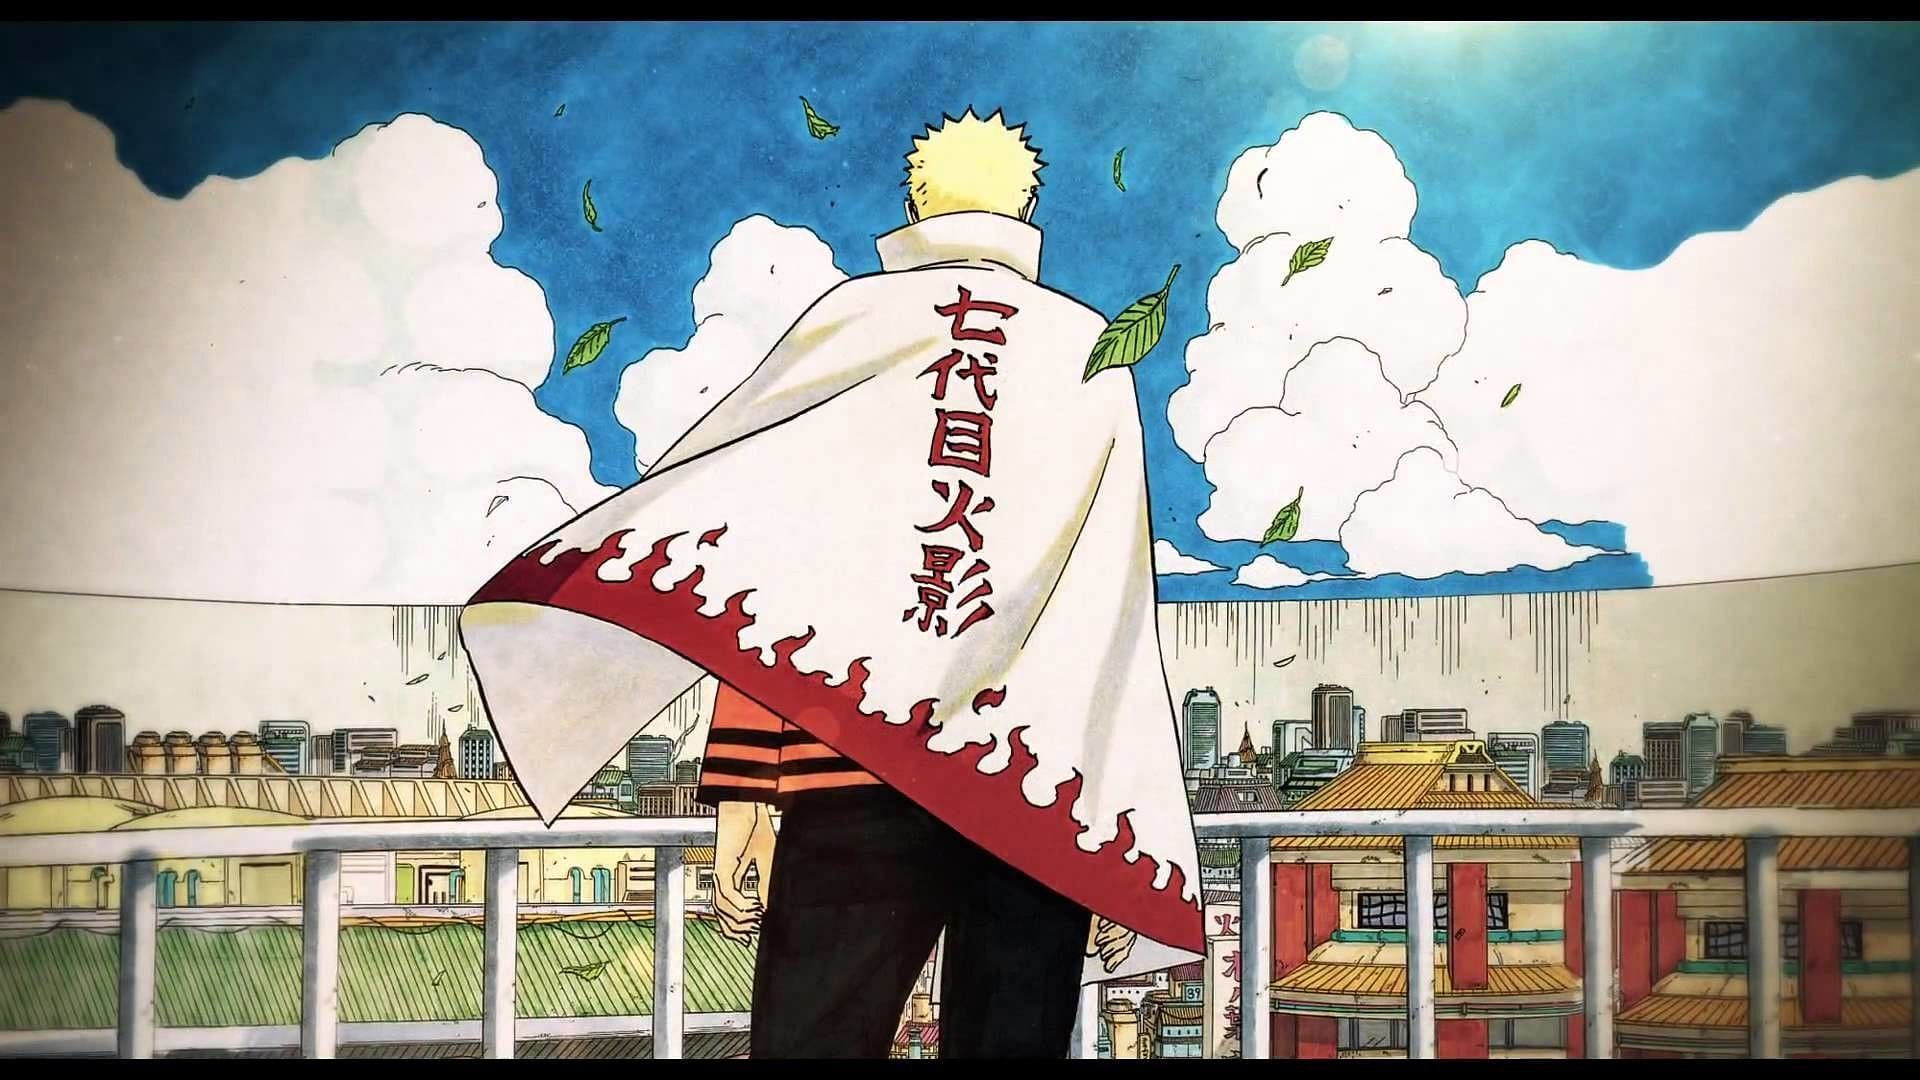 5 characters who always believed that Naruto will be the Hokage (and 5 who  never did)